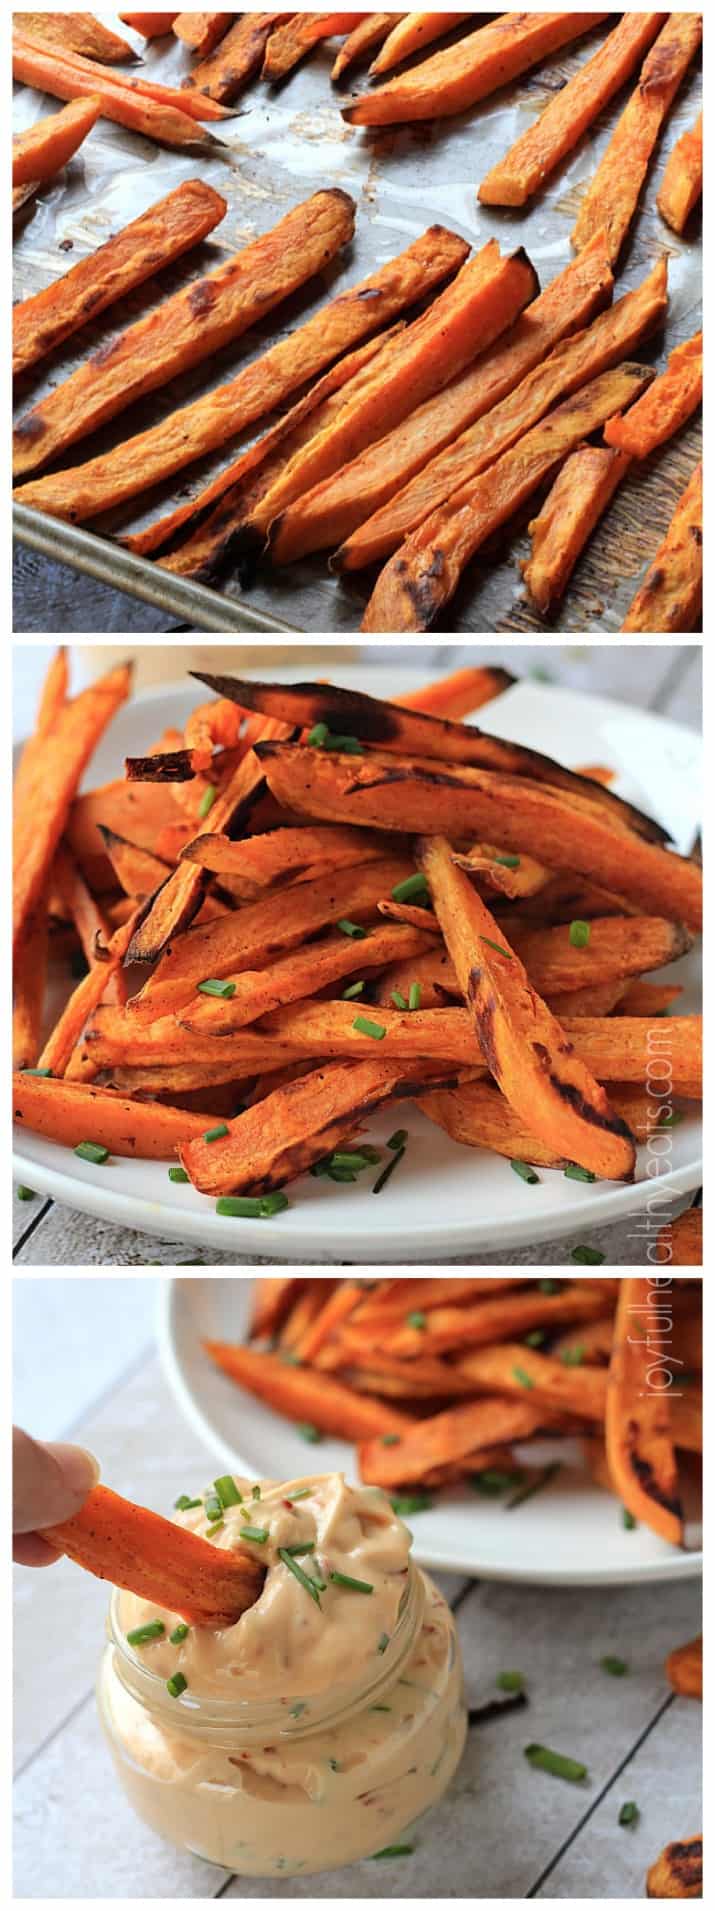 Crispy Baked Sweet Potato Fries with a Chipotle Lime Aioli | Healthy ...